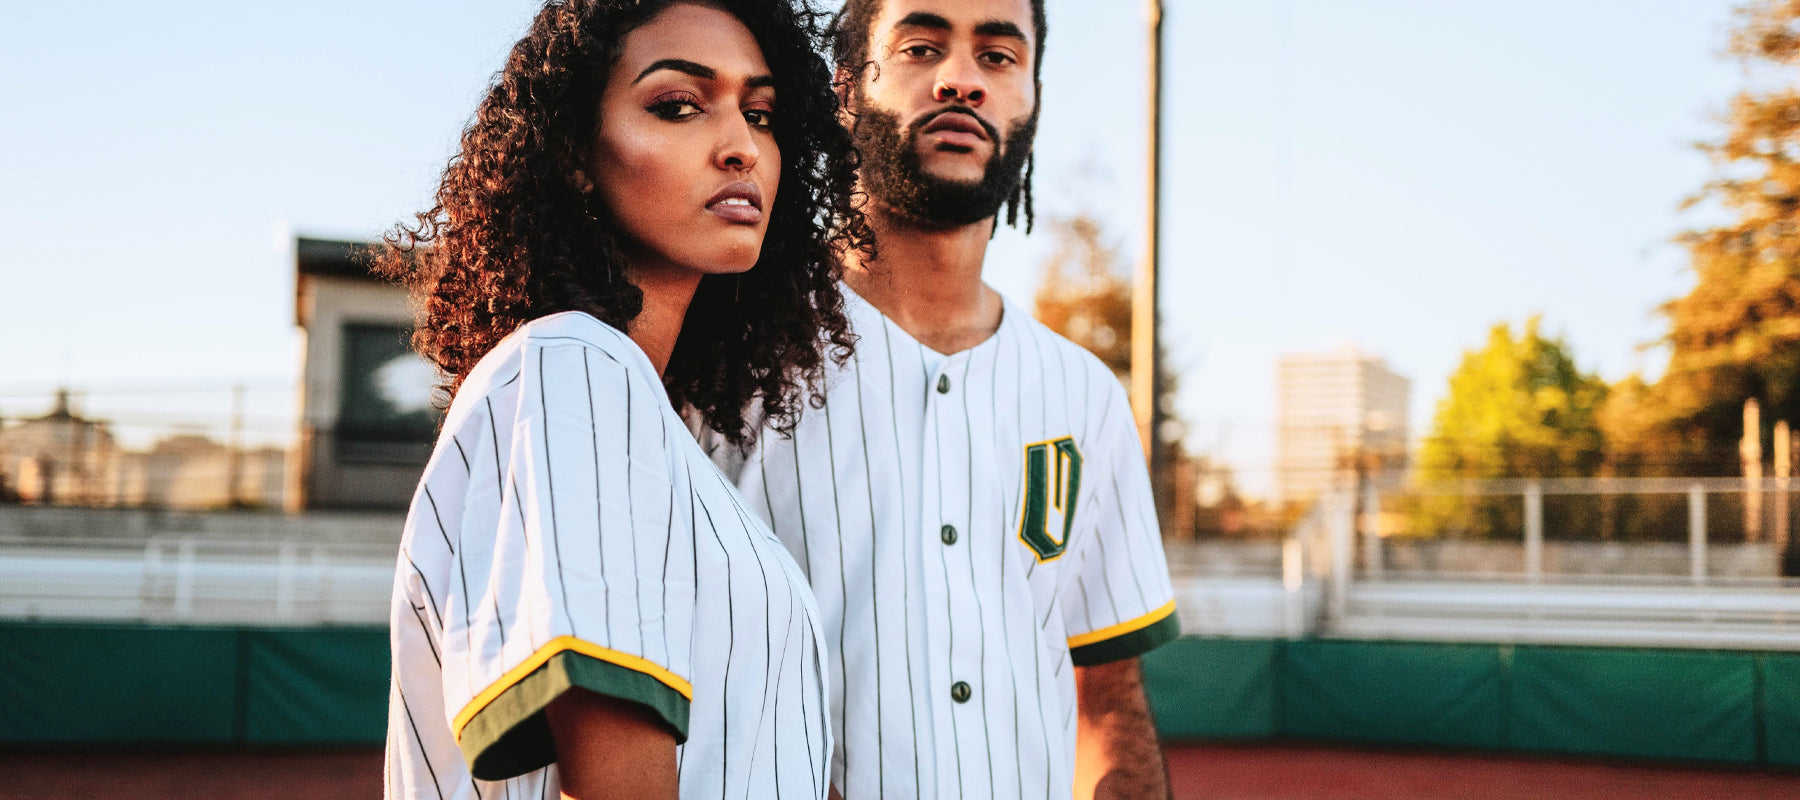 Man and woman on a baseball field in green striped white baseball jerseys with green and gold O for Oakland appliques on the chests.